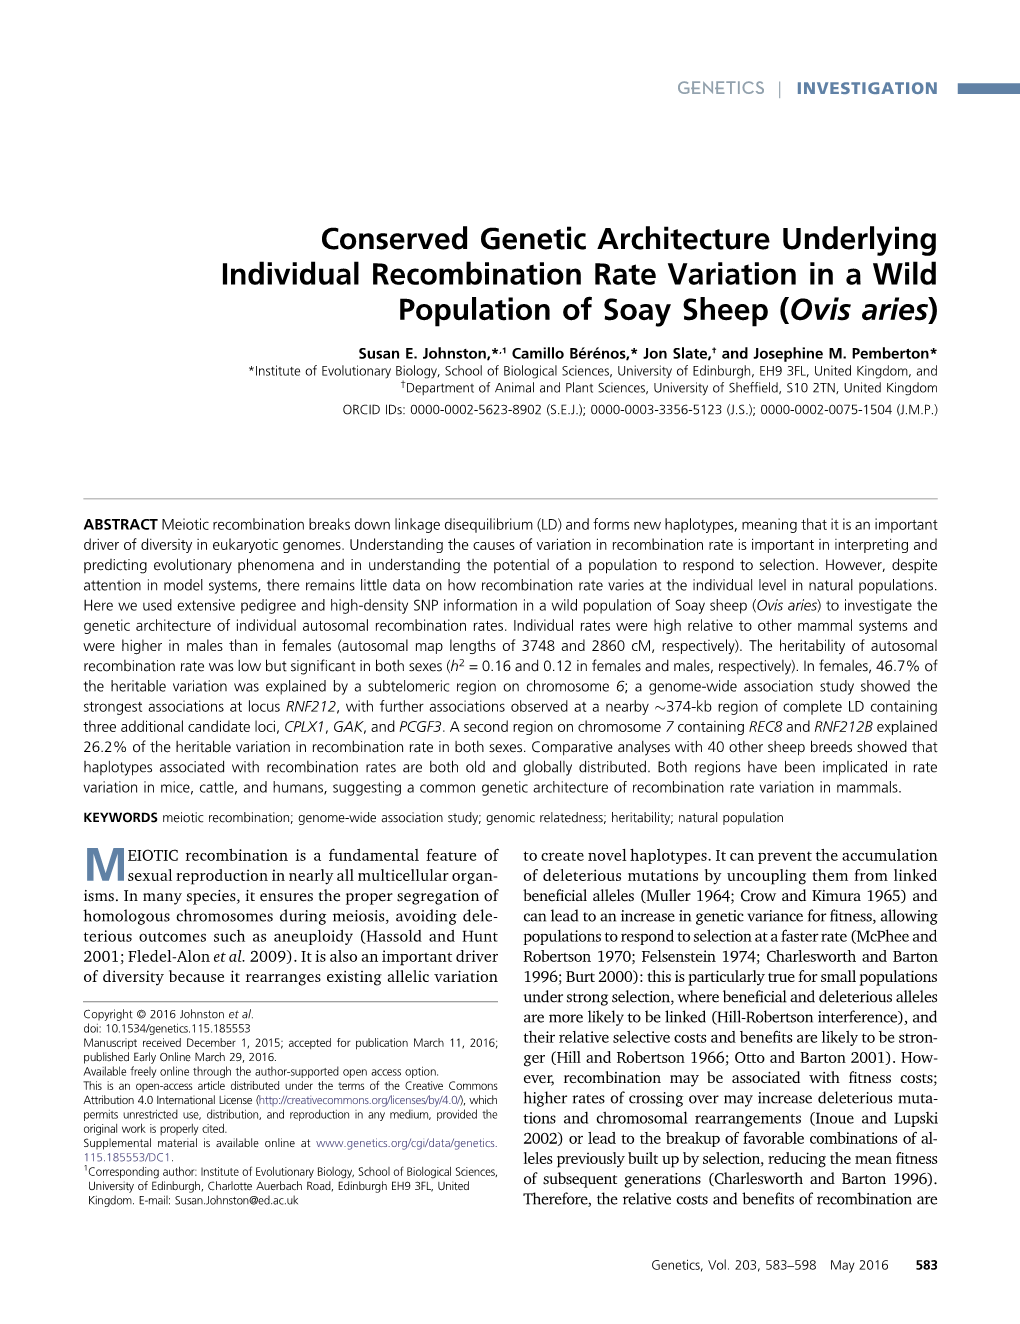 Conserved Genetic Architecture Underlying Individual Recombination Rate Variation in a Wild Population of Soay Sheep (Ovis Aries)